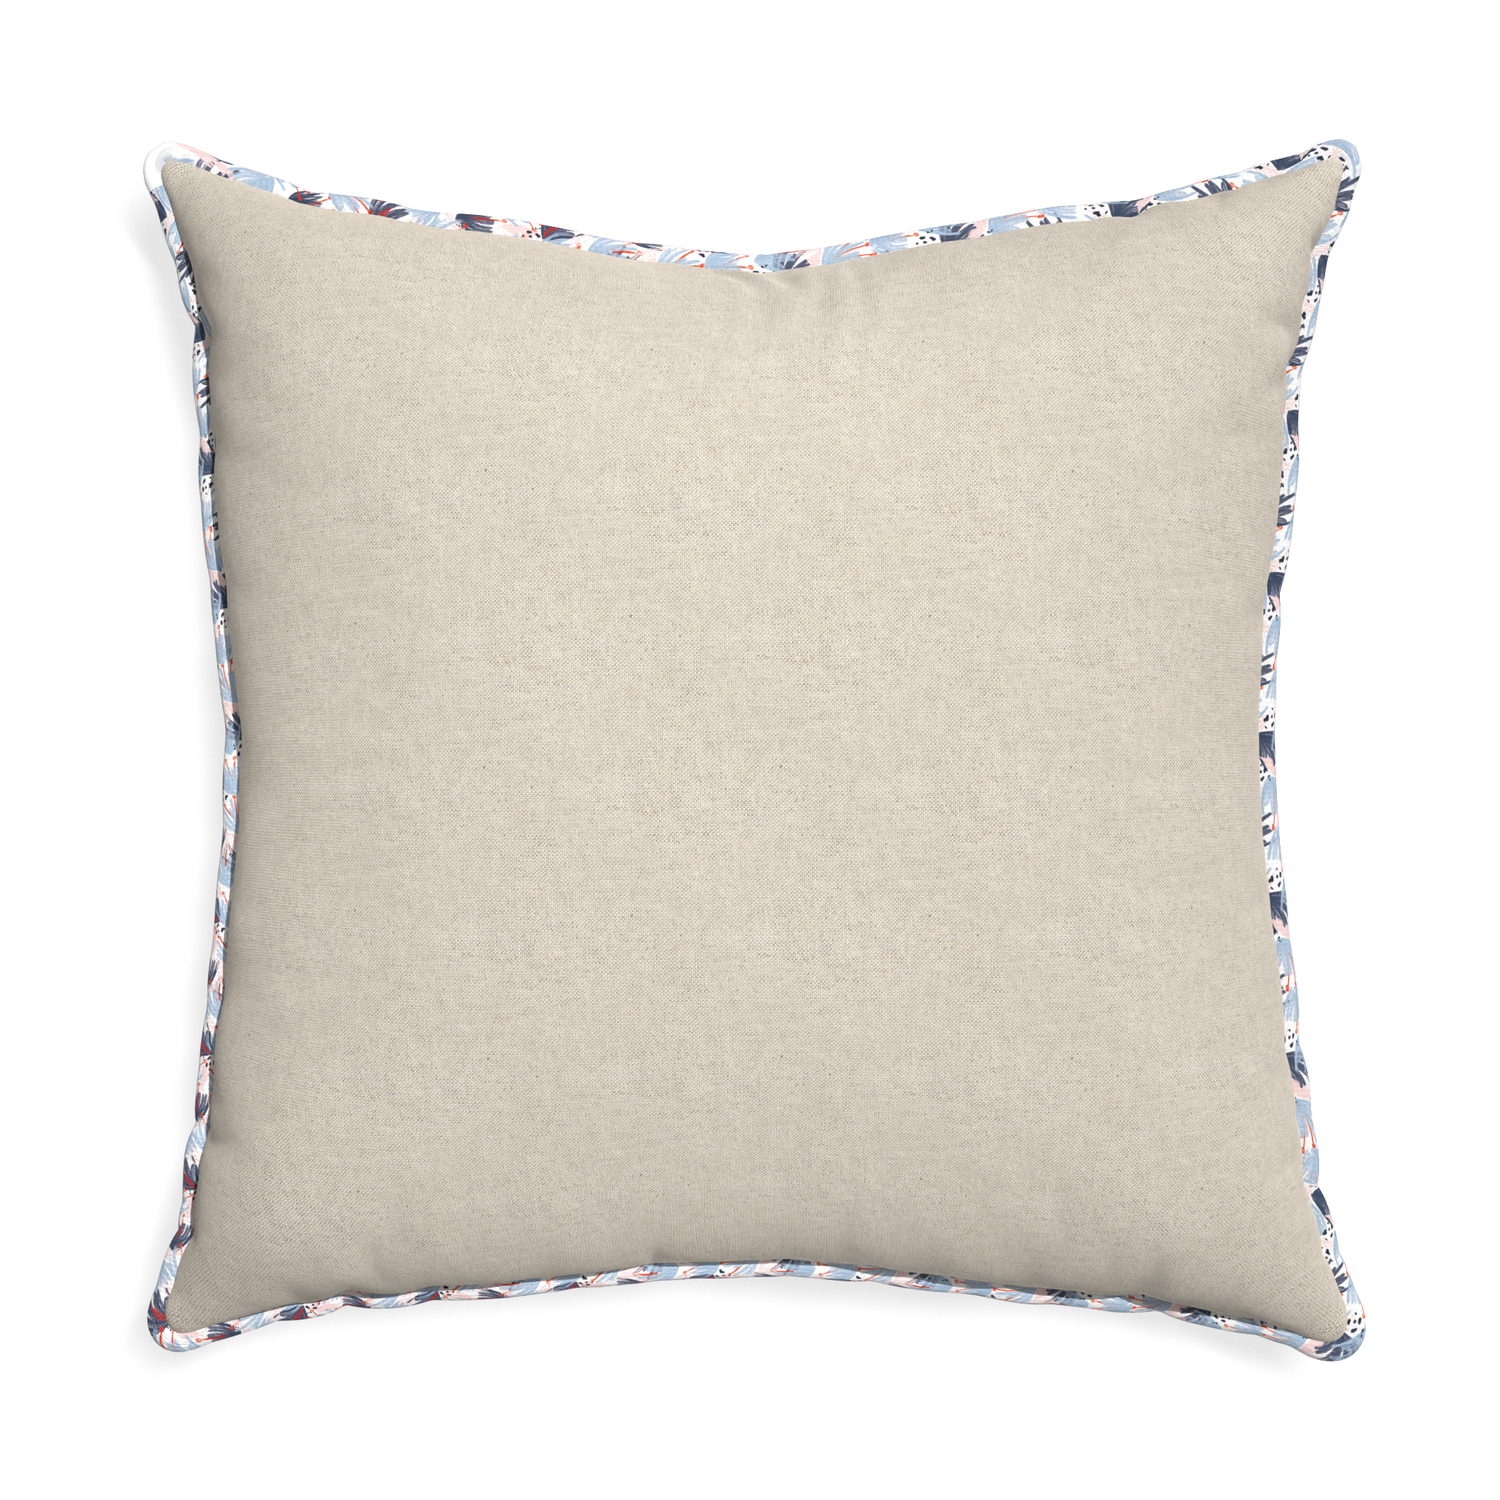 Euro-sham oat custom light brownpillow with e piping on white background